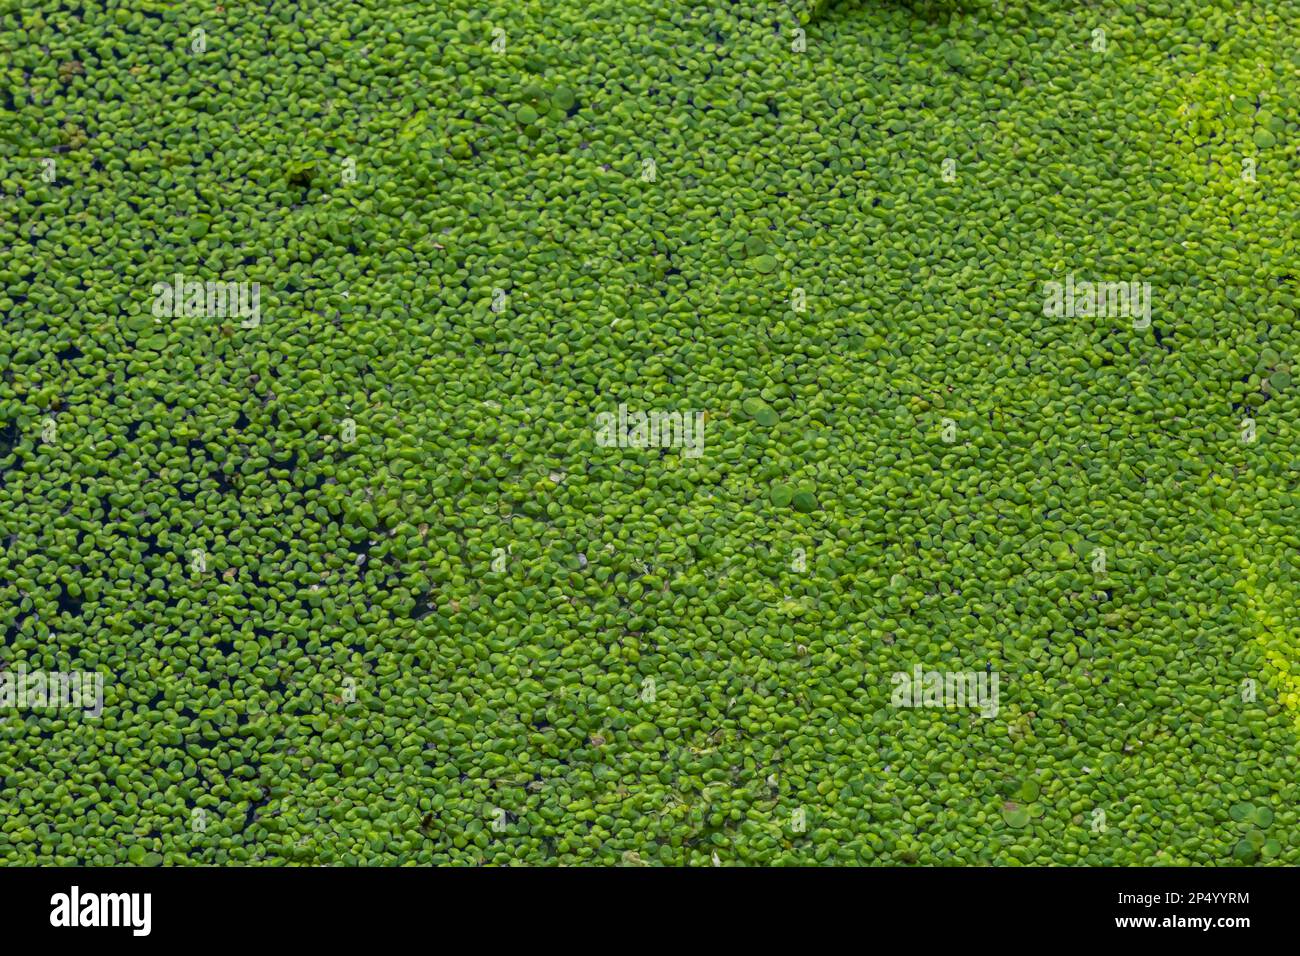 Common Duckweed, Duckweed, Lesser Duckweed, Natural Green Duckweed Lemna perpusilla Torrey on The water for background or texture. close up Green leaf Stock Photo